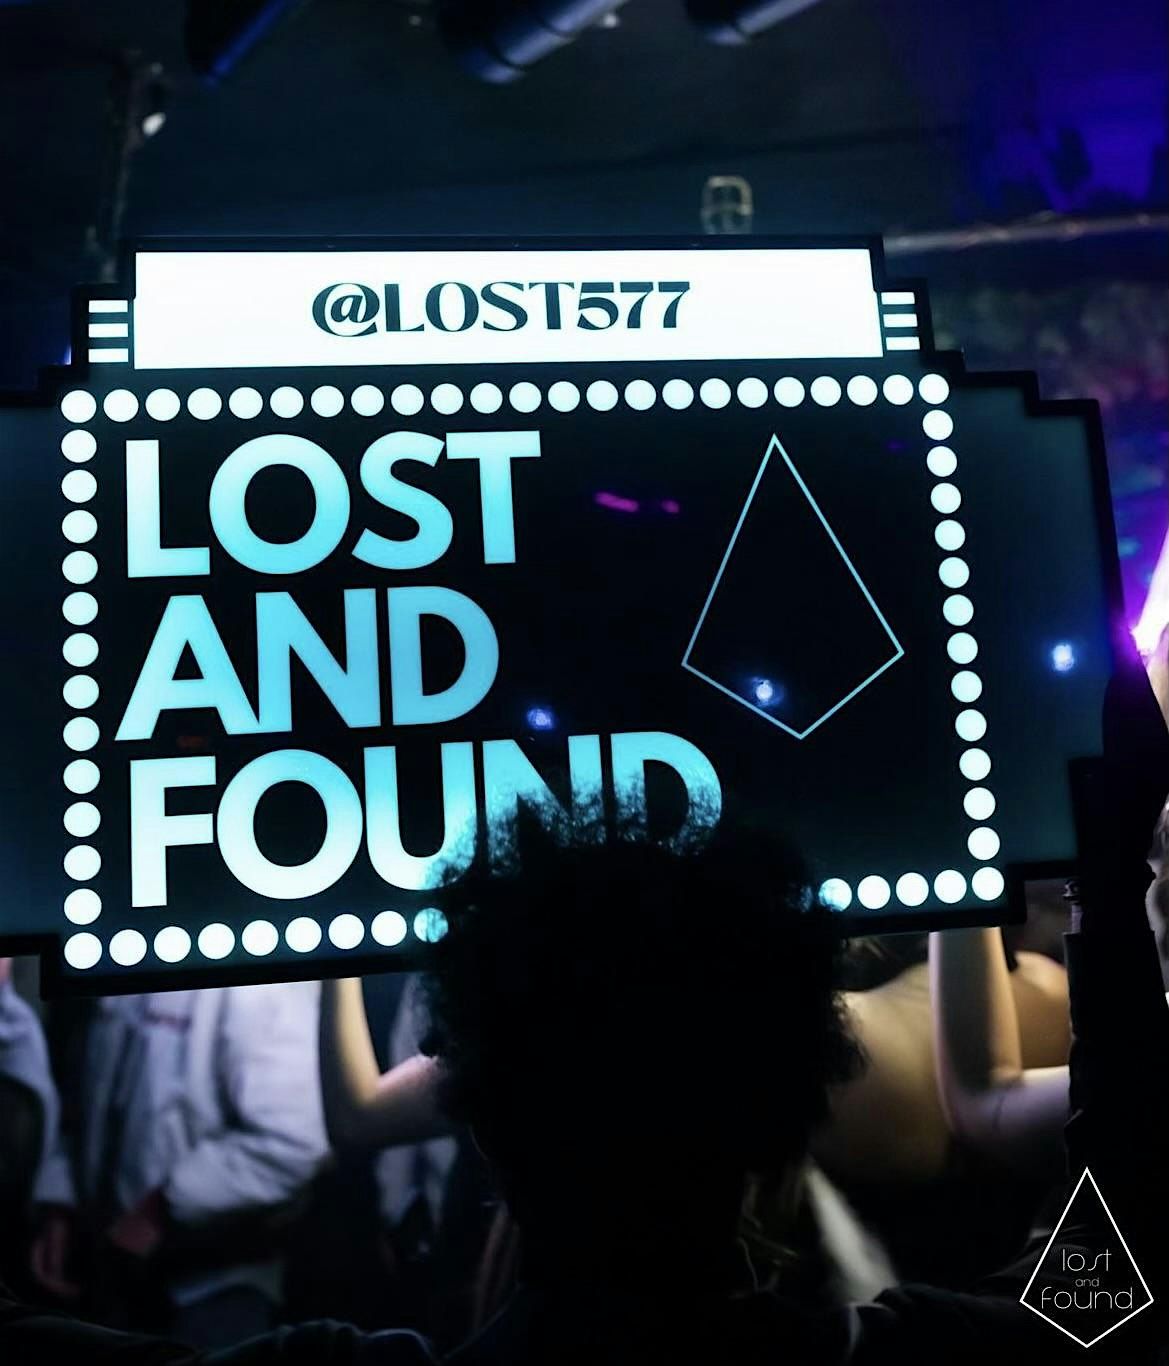 This Friday LADIES FREE inside Lost & Found